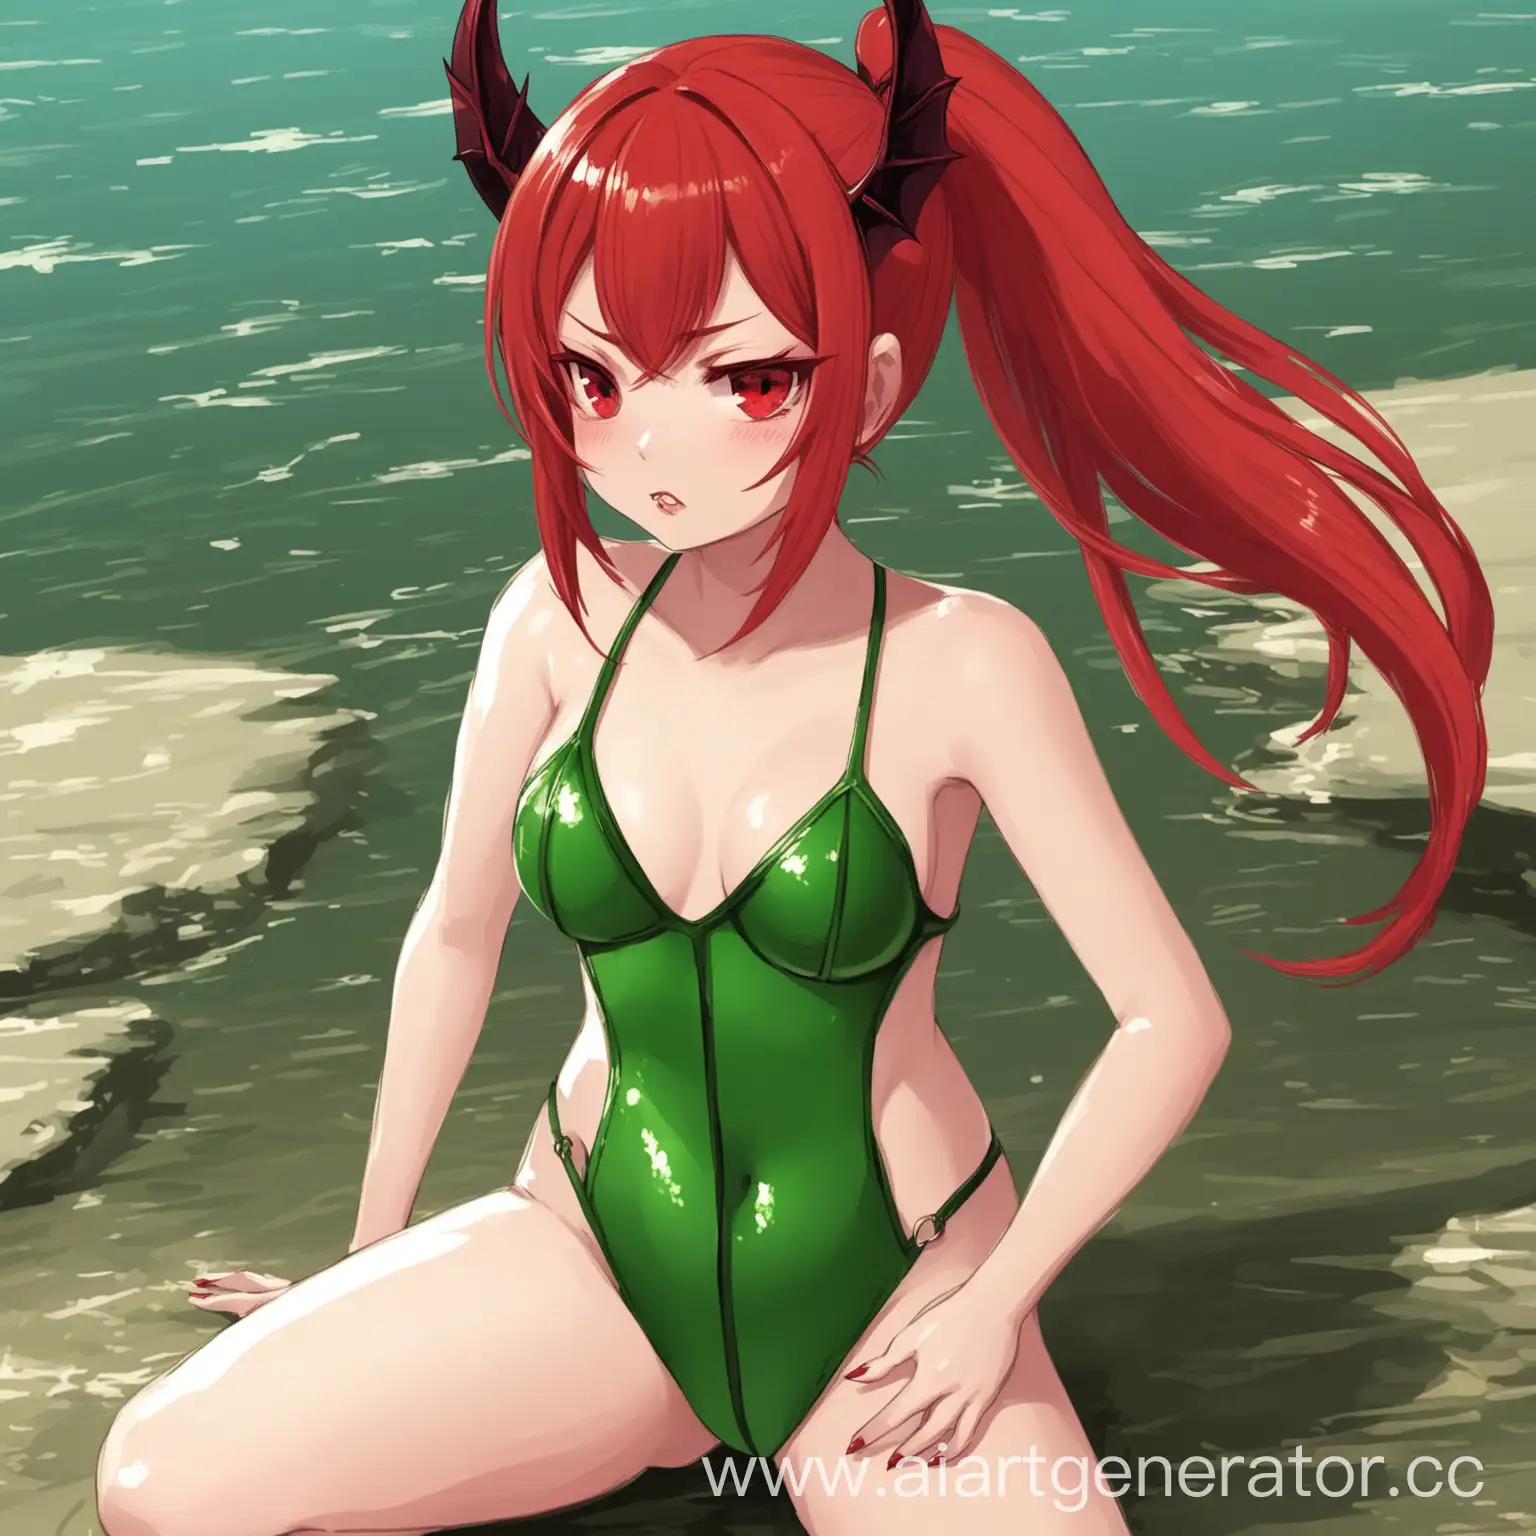 RedHaired-Girl-in-Green-Swimsuit-Succubus-Fantasy-Art